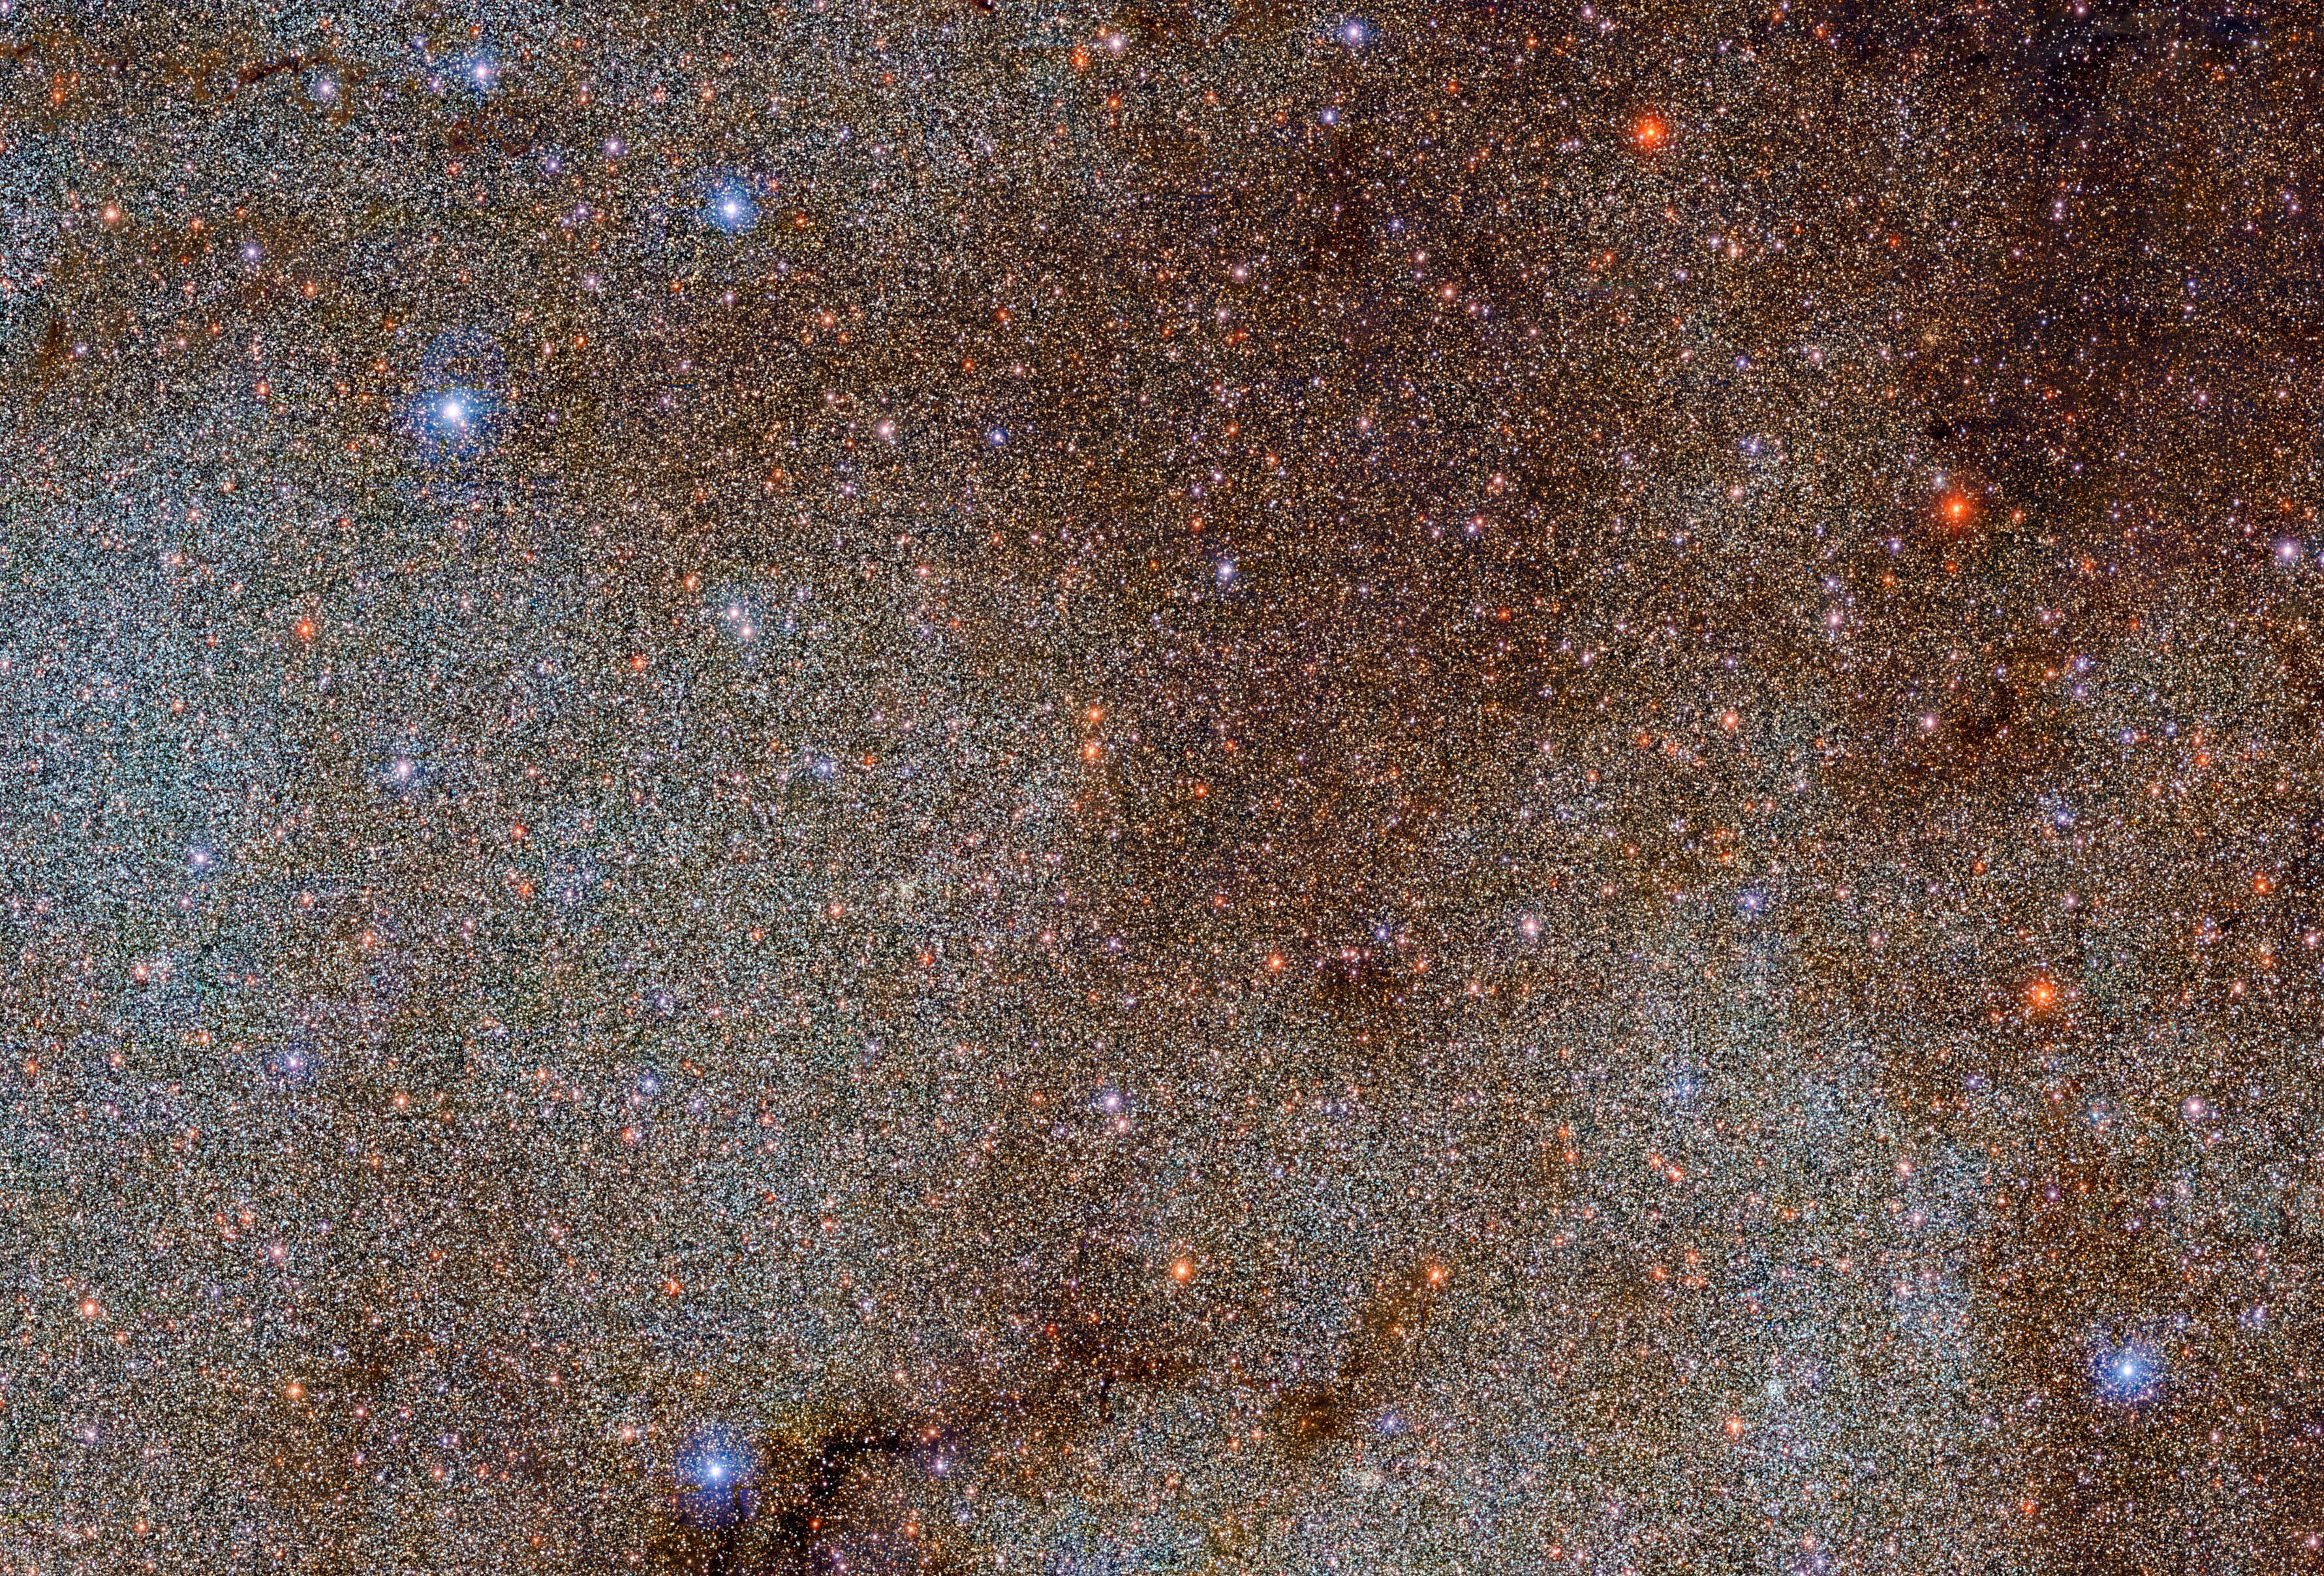 This image, which is brimming with stars and dark dust clouds, is a small extract — a mere pinprick — of the full Dark Energy Camera Plane Survey (DECaPS2) of the Milky Way